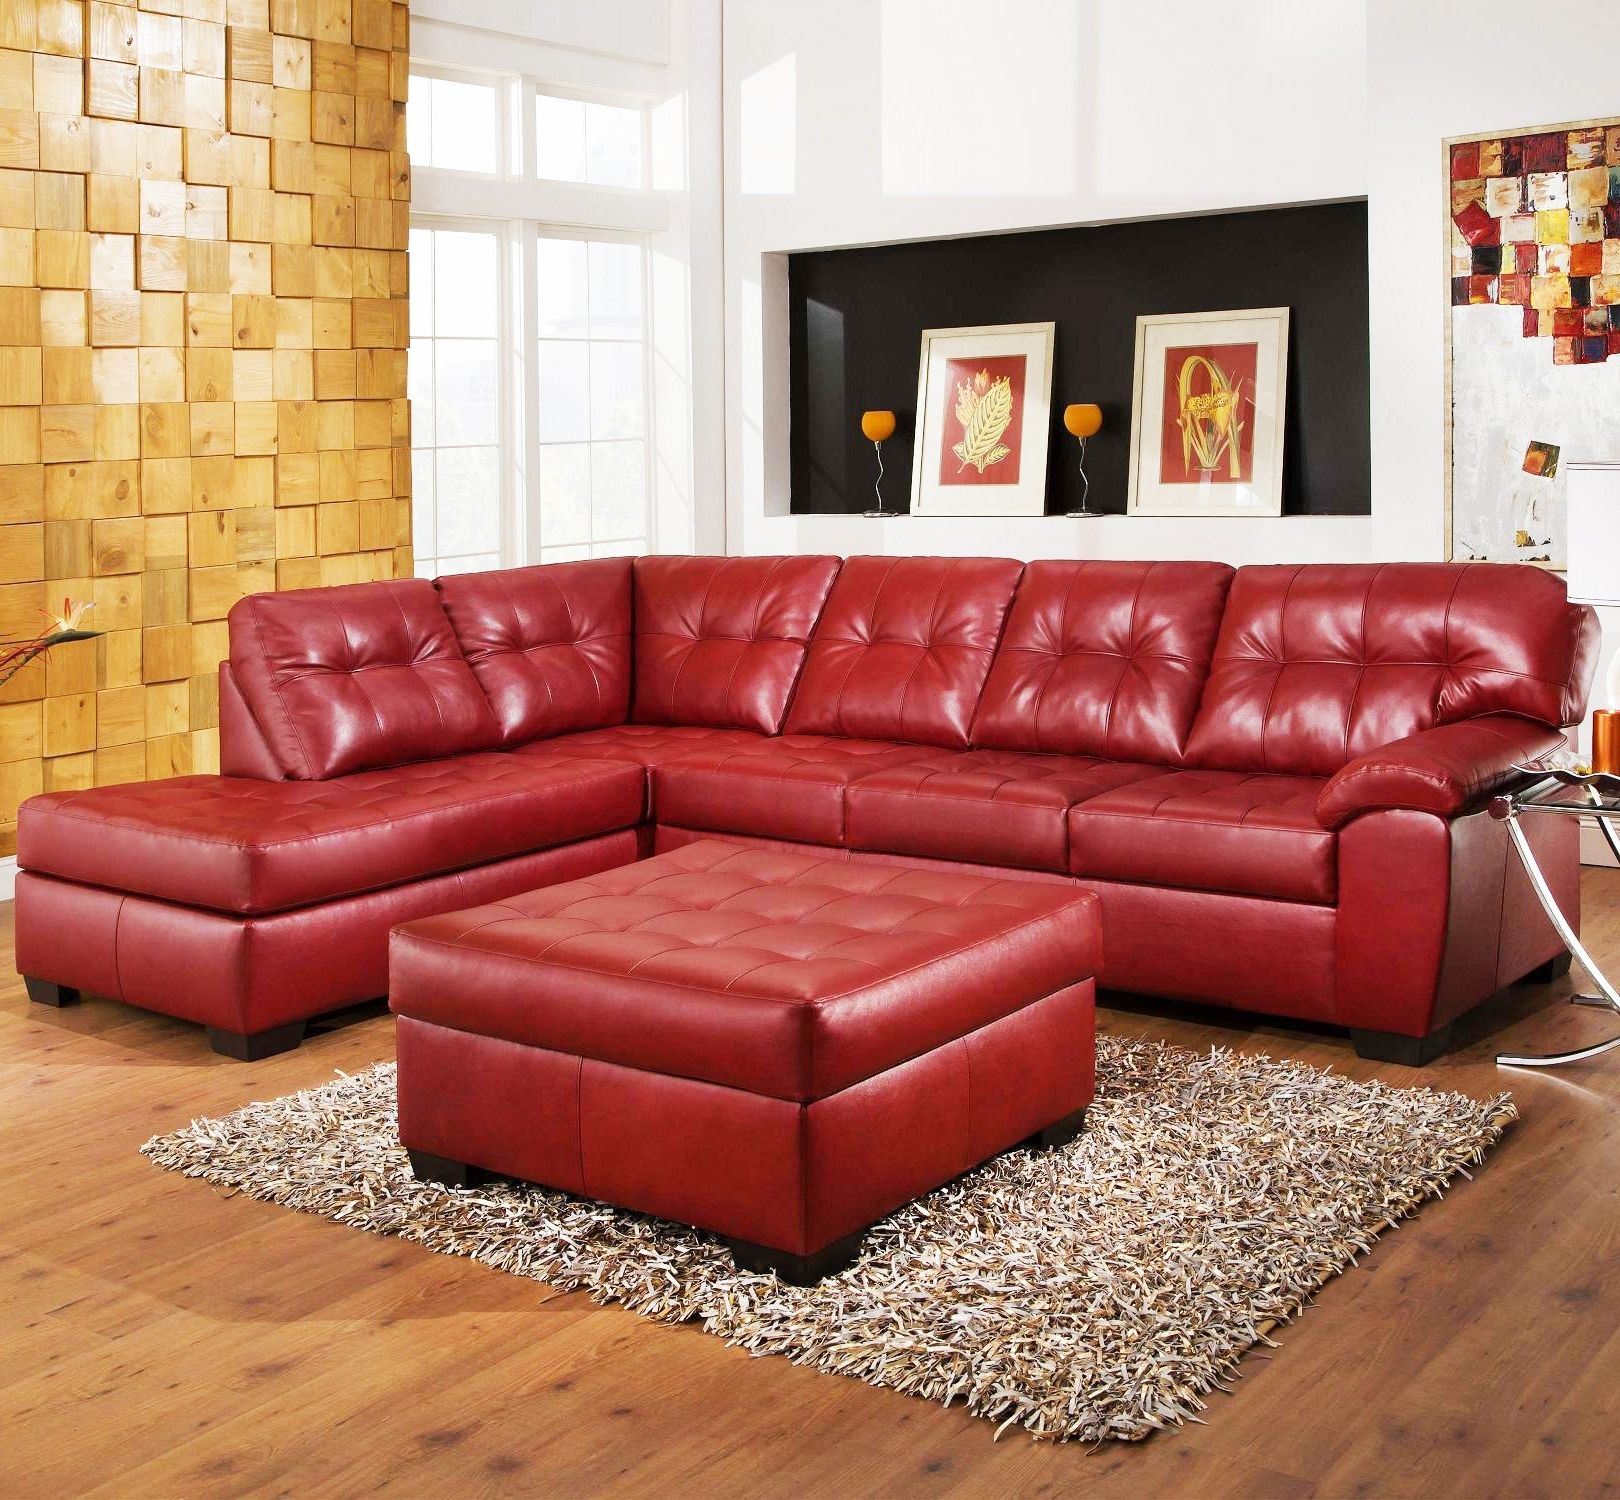 Red Faux Leather Sectionals Pertaining To Well Known Sofas : Sectional Couch Small Sectional Couch Red Sectional Couch (View 1 of 20)